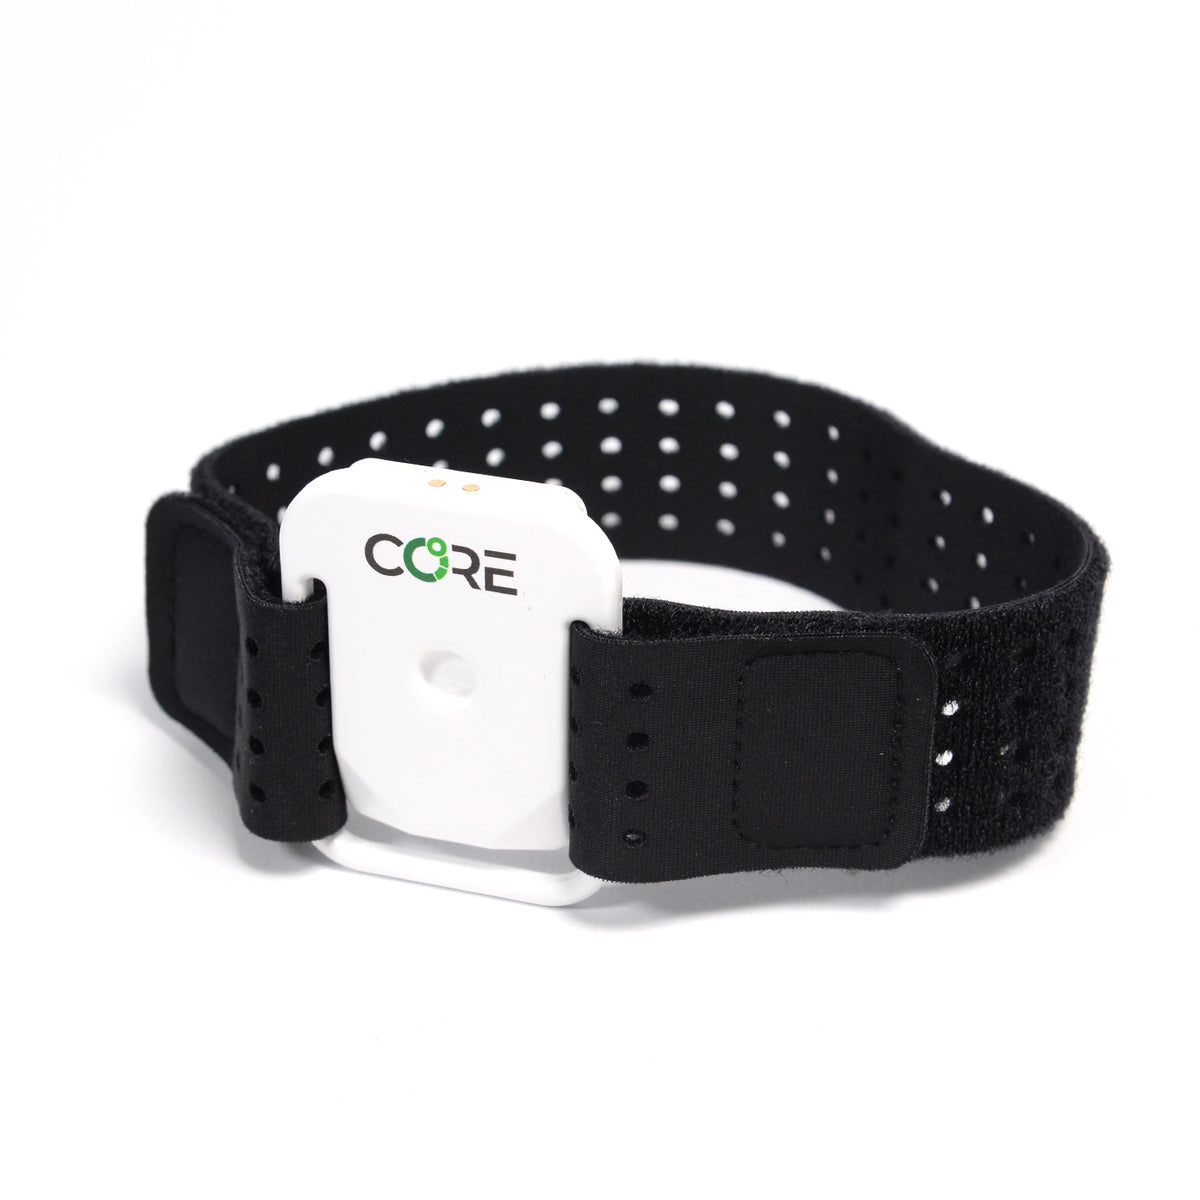 CORE arm Strap for wearing the device - CORE